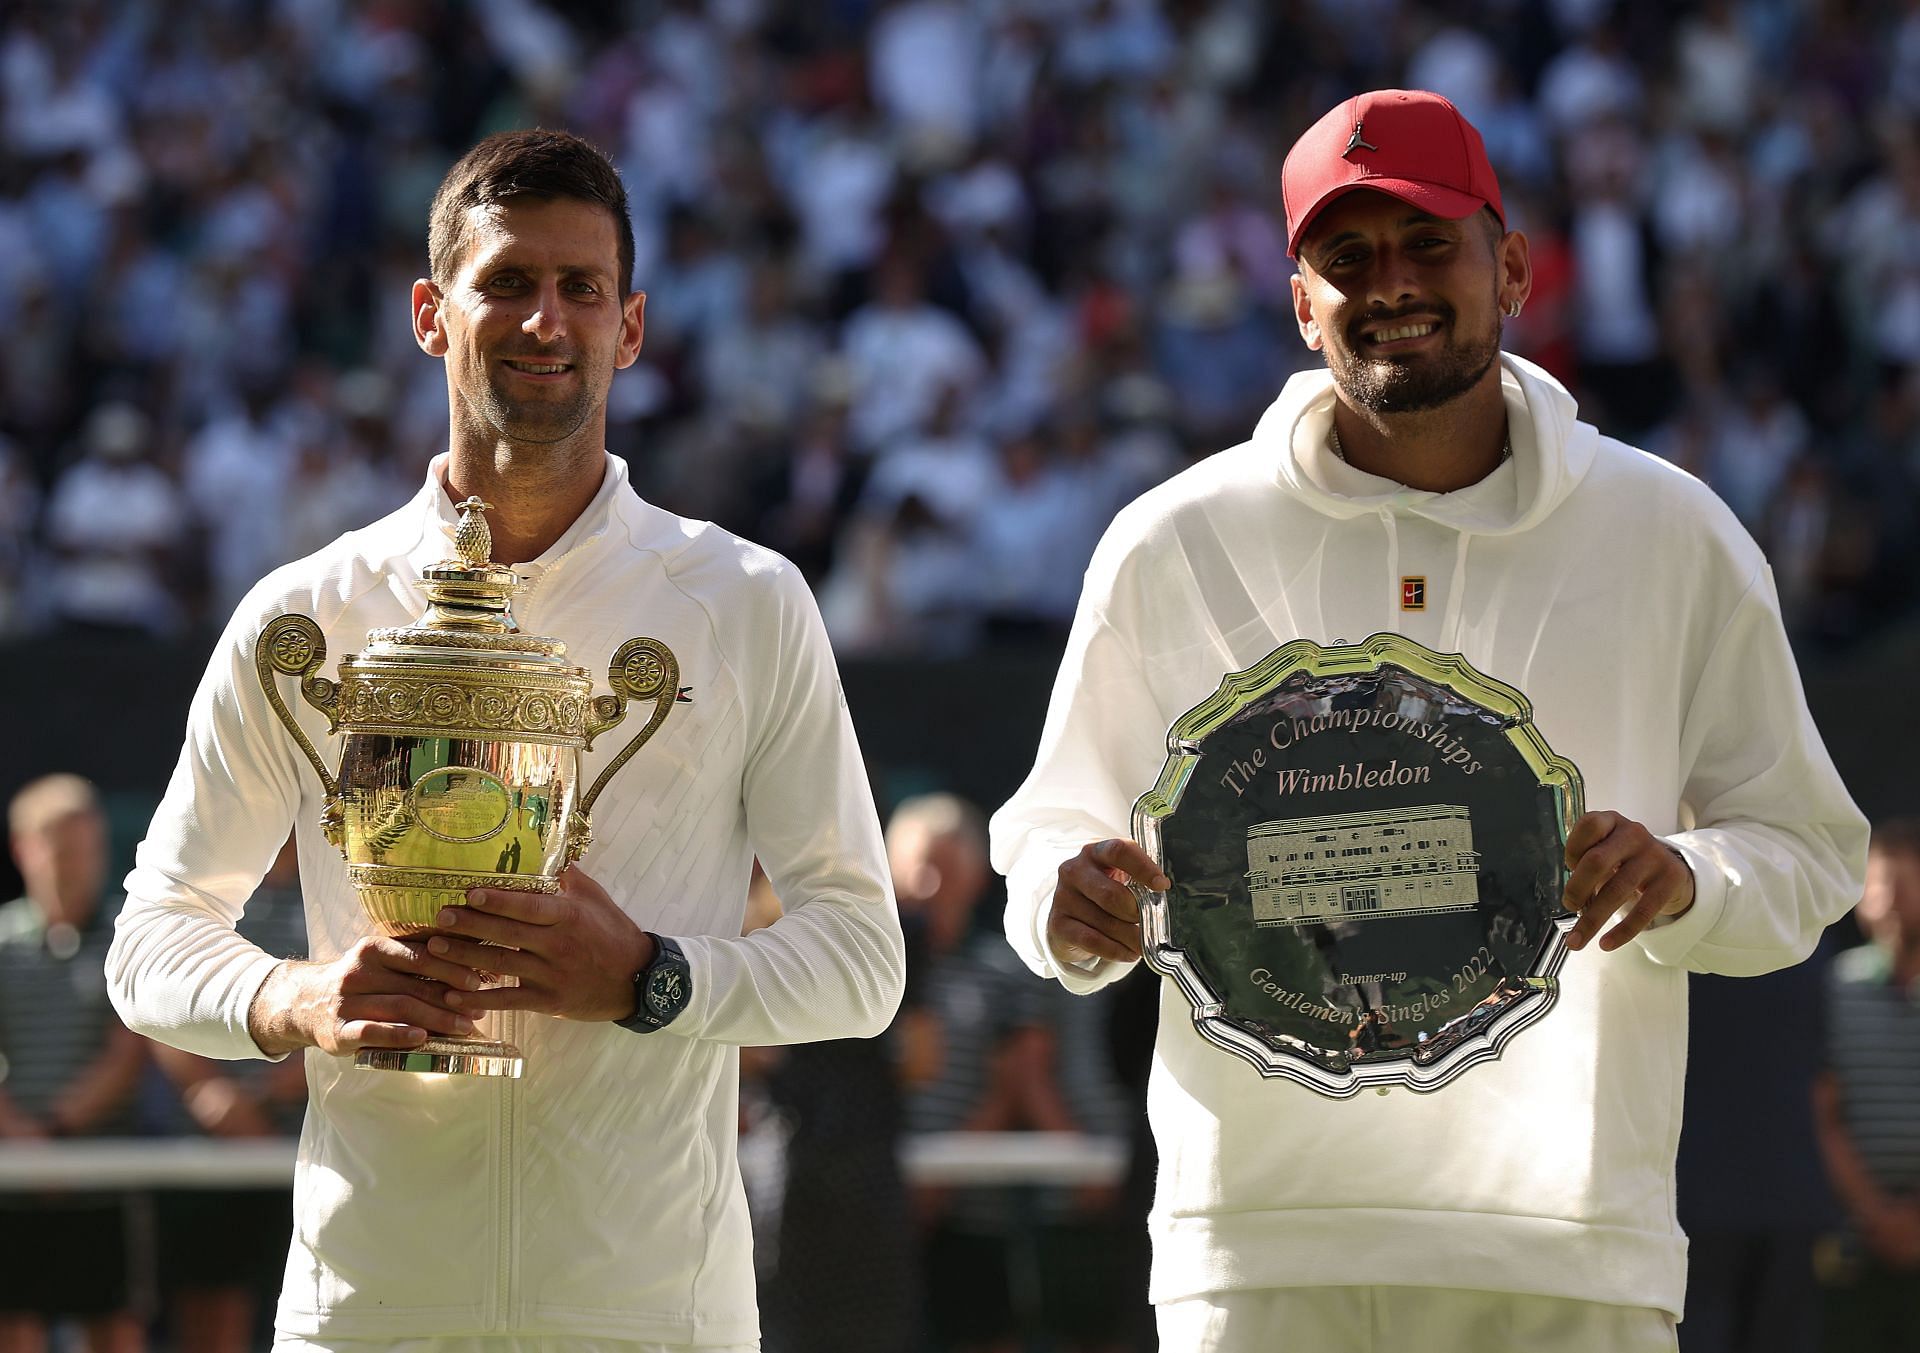 Novak Djokovic and runner-up Nick Kyrgios pose for a photo with their trophies at the Wimbledon 2022